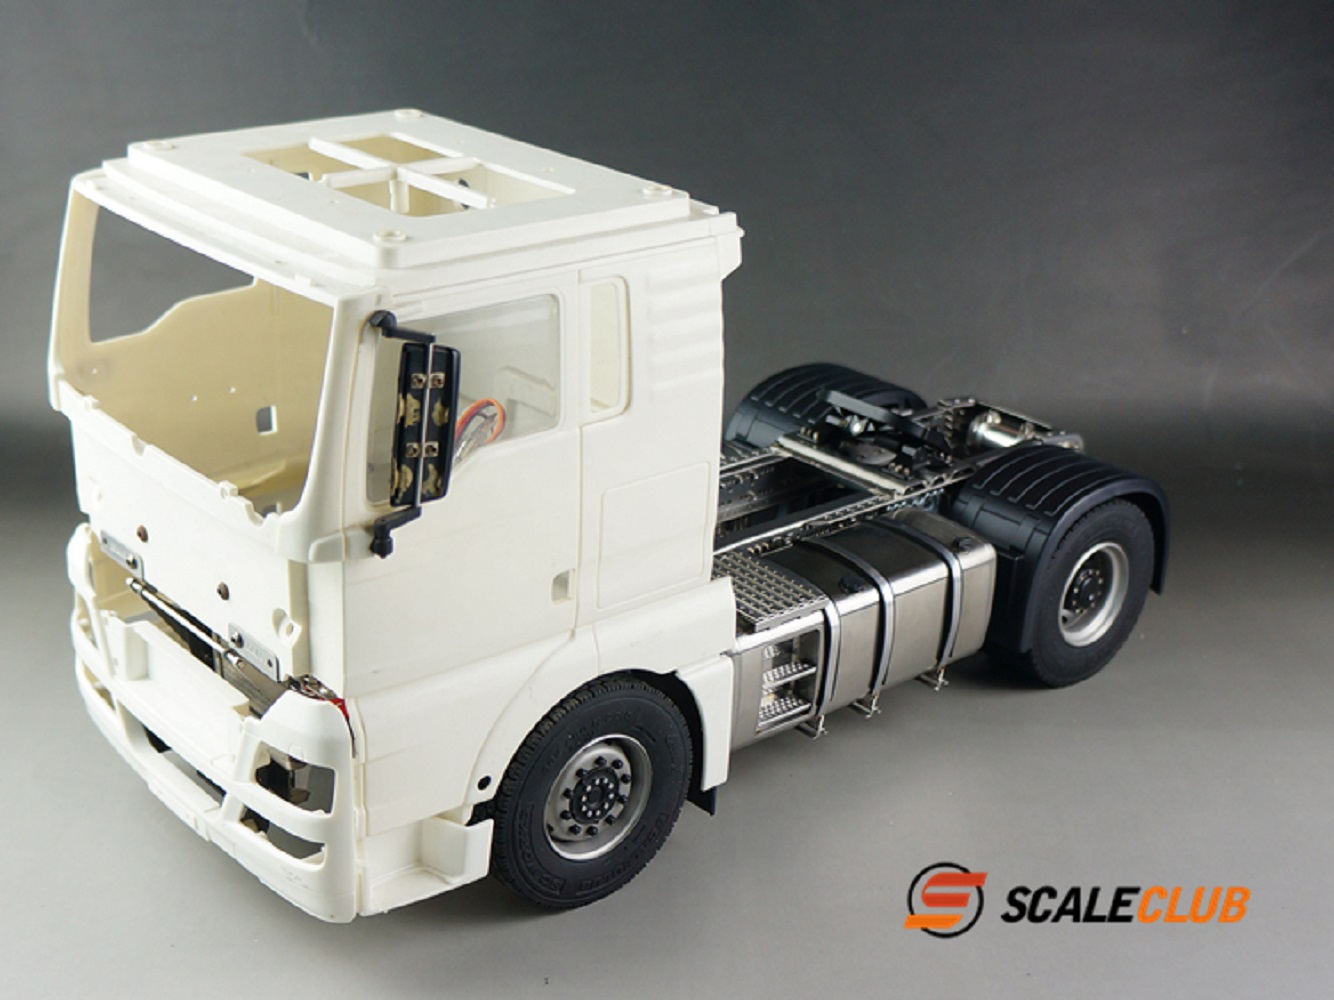 Scaleclub Model 1/14 -For Tamiya Man Full Metal 4x4 4x2 Chassis For Lesu Scania Actros Volvo Car Parts Rc Truck Trailer